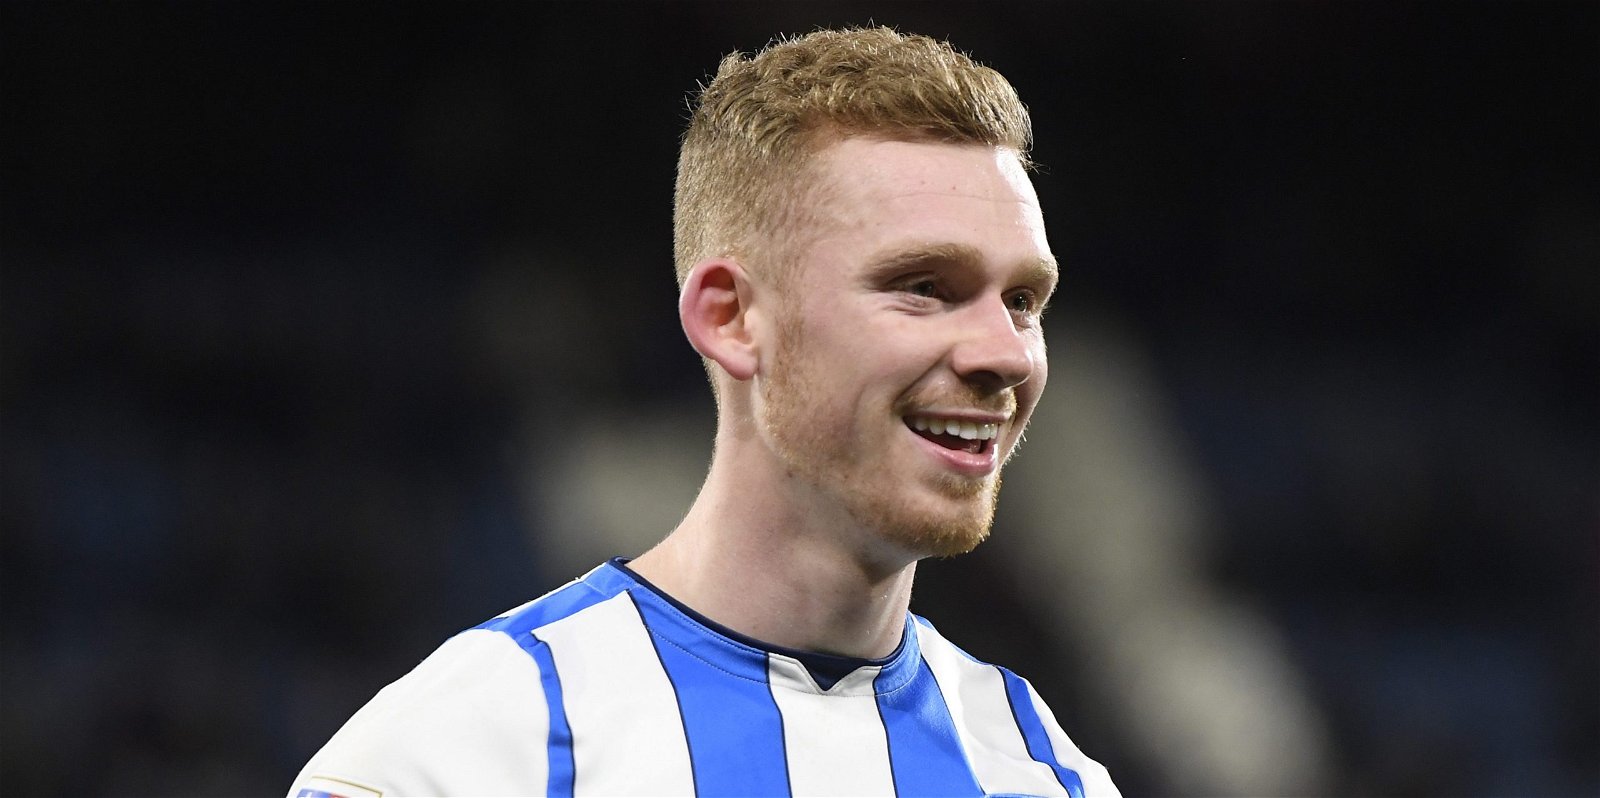 Huddersfield Town, &#8220;I don&#8217;t tend to look&#8221; Huddersfield Town star on Premier League links